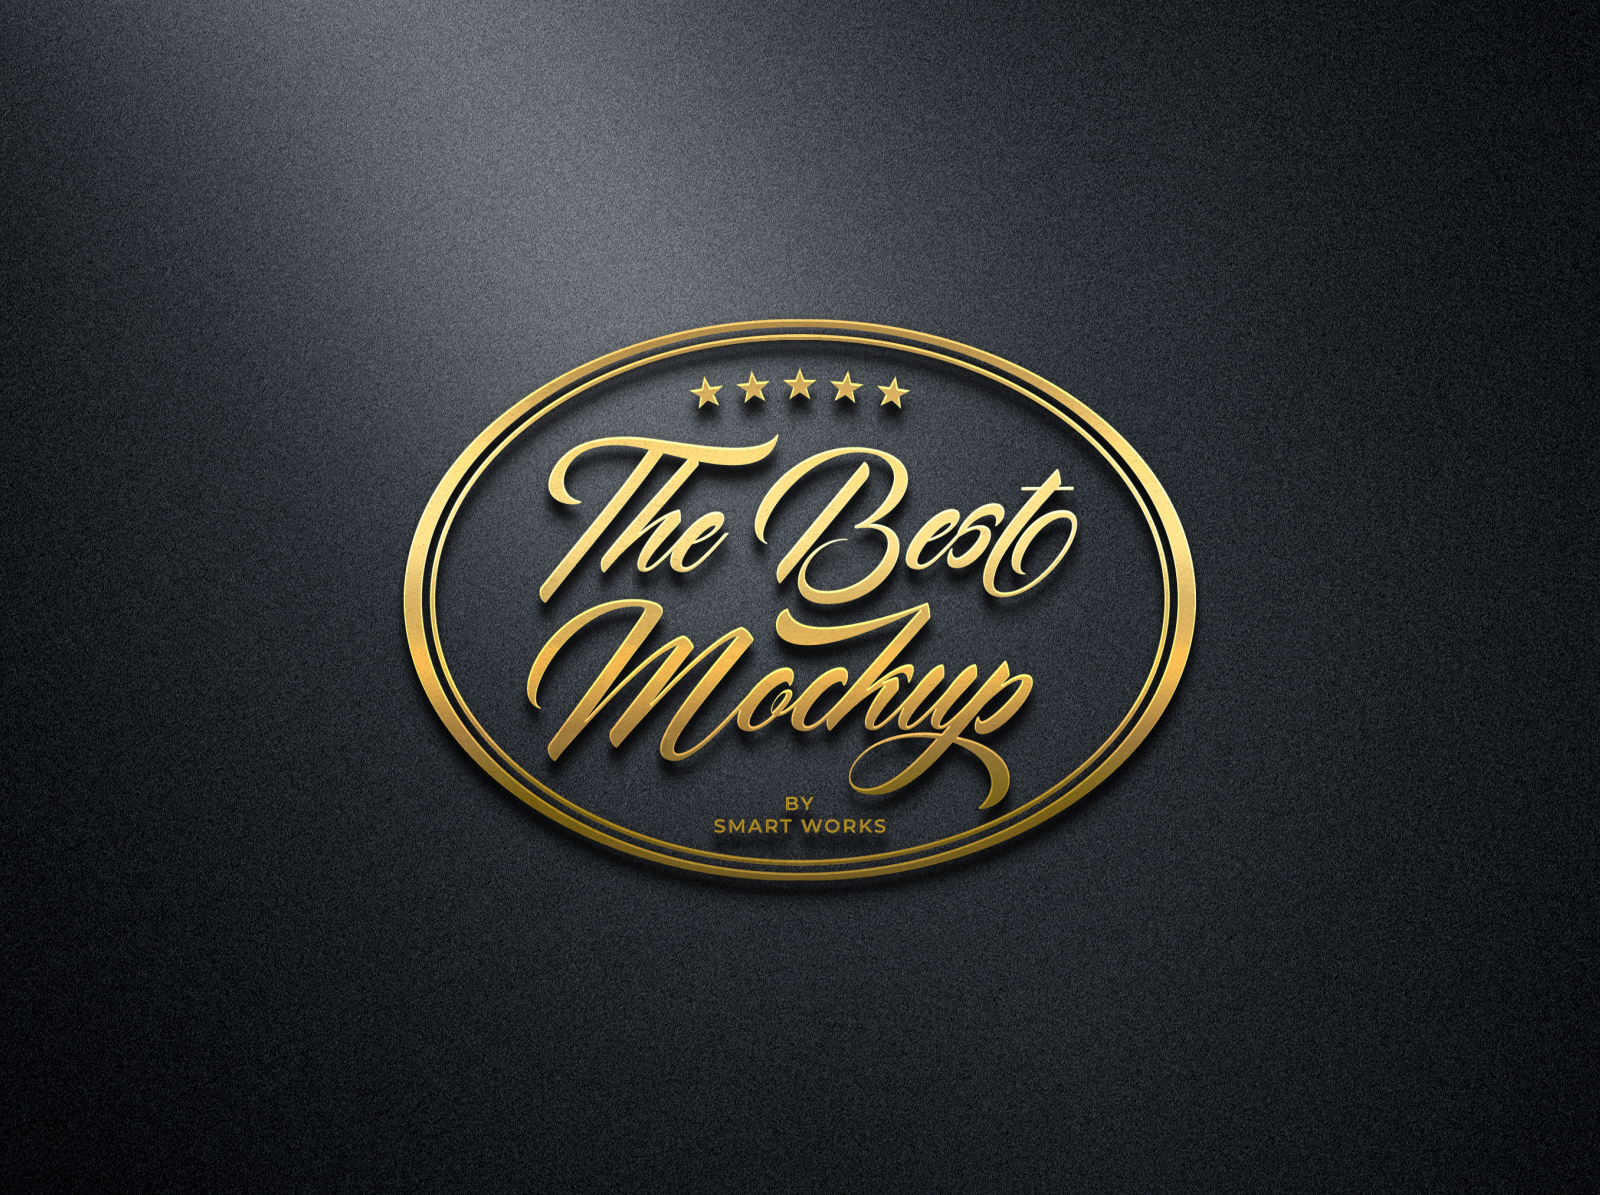 3D Gold Logo Mockup on Black Wall by Smart Works on Dribbble